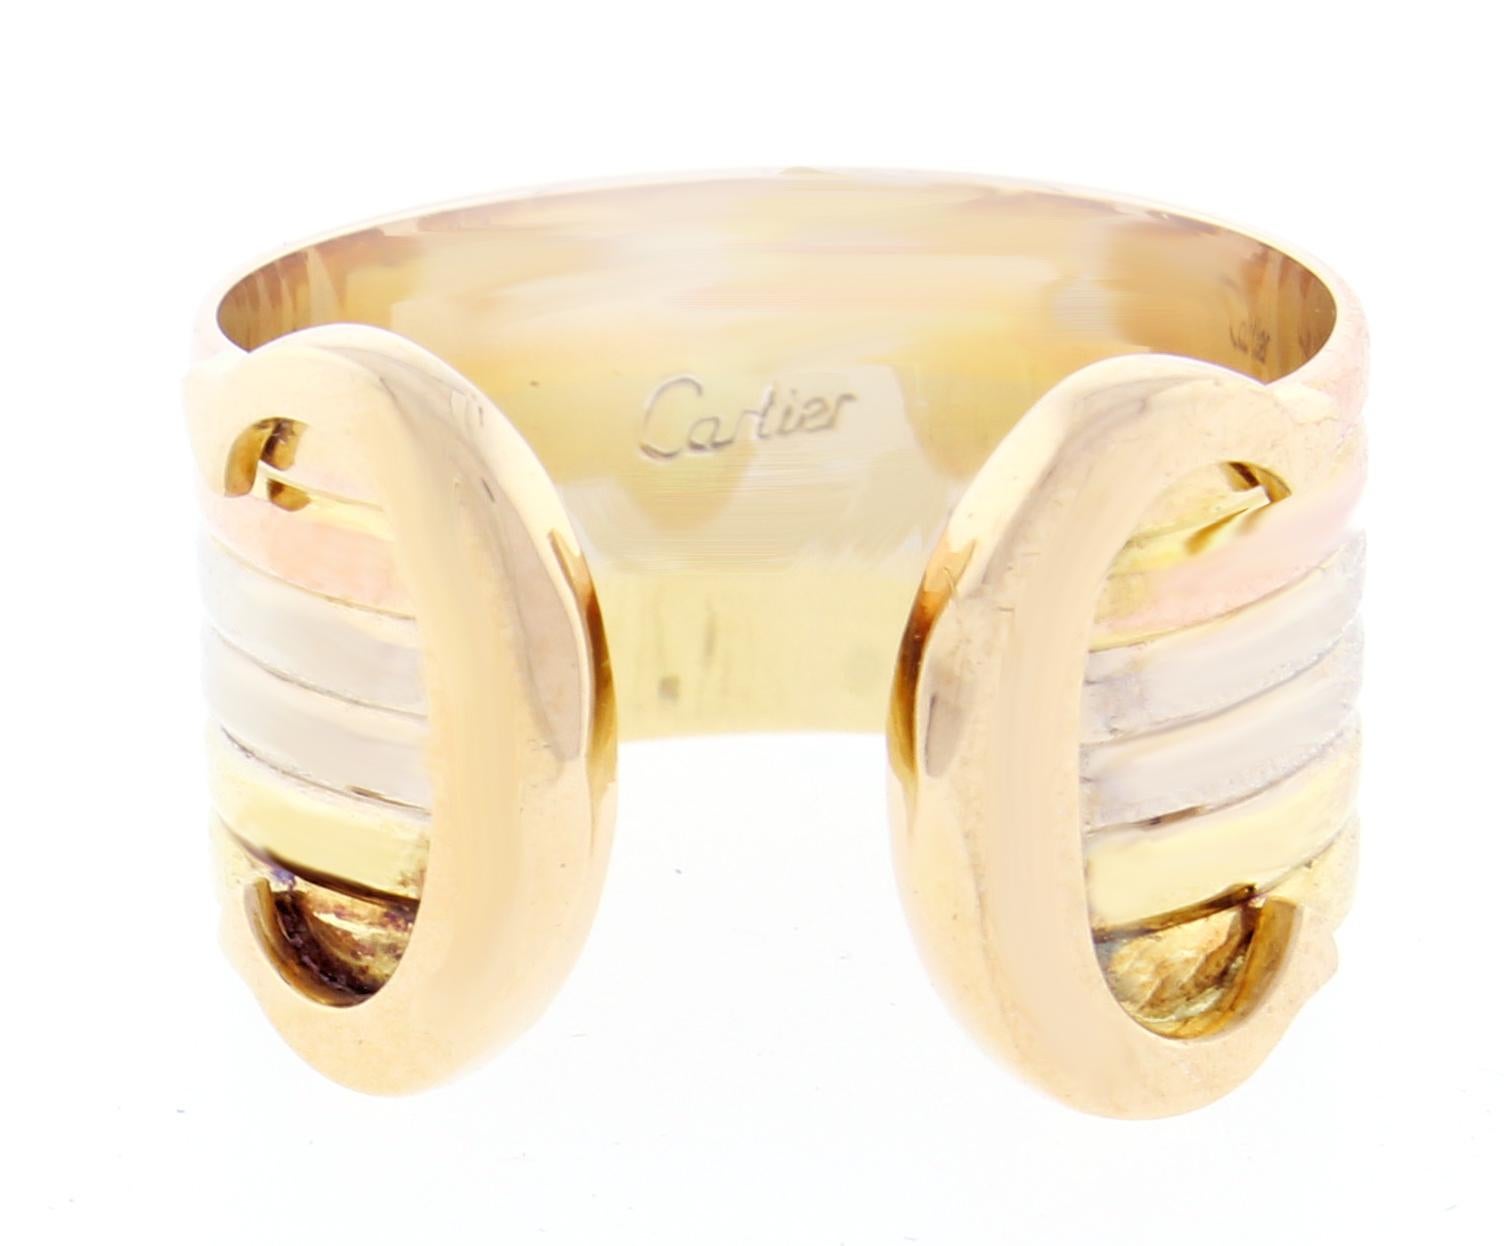 From Cartier, their iconic double C de Cartier decor trinity ring. Crafted from white yellow and pink 18 Karat gold. 7/16 of an inch wide, size 50, US 5 ¼